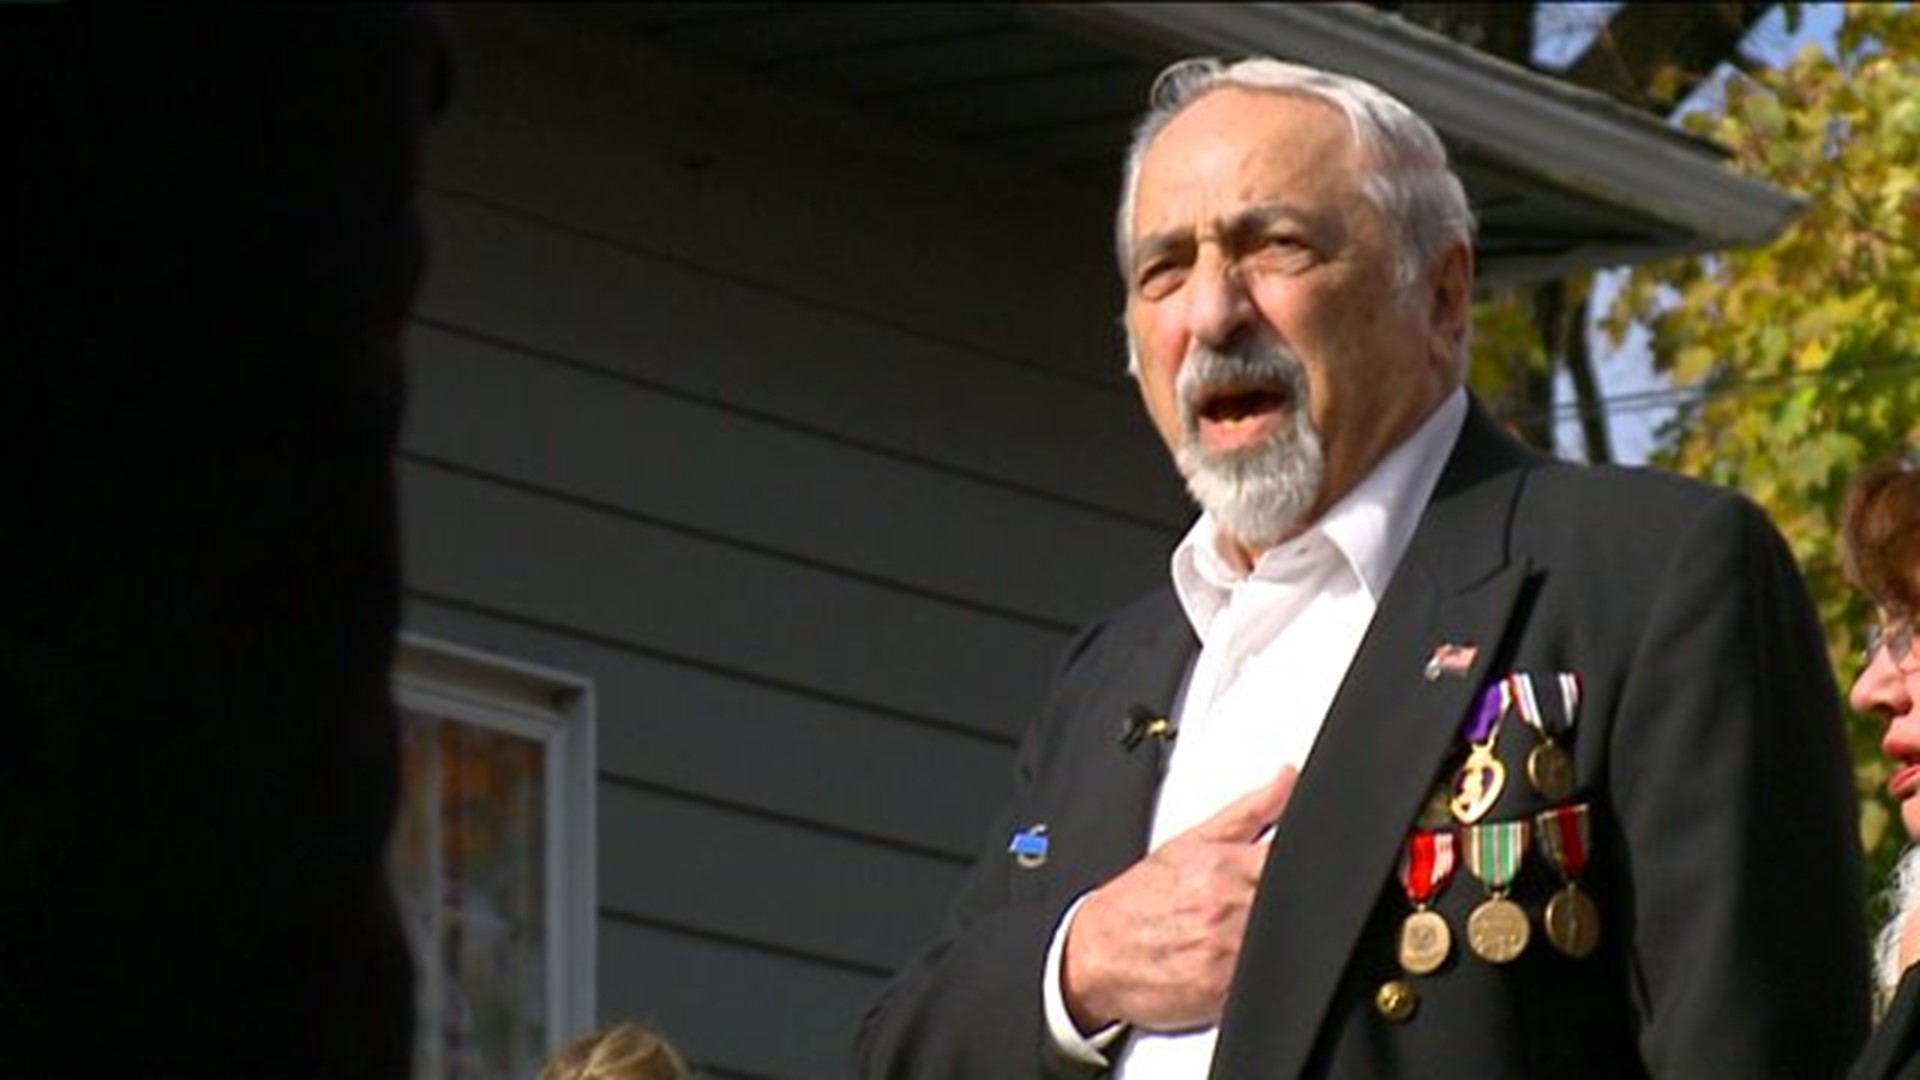 World War II vet honored decades after completing service